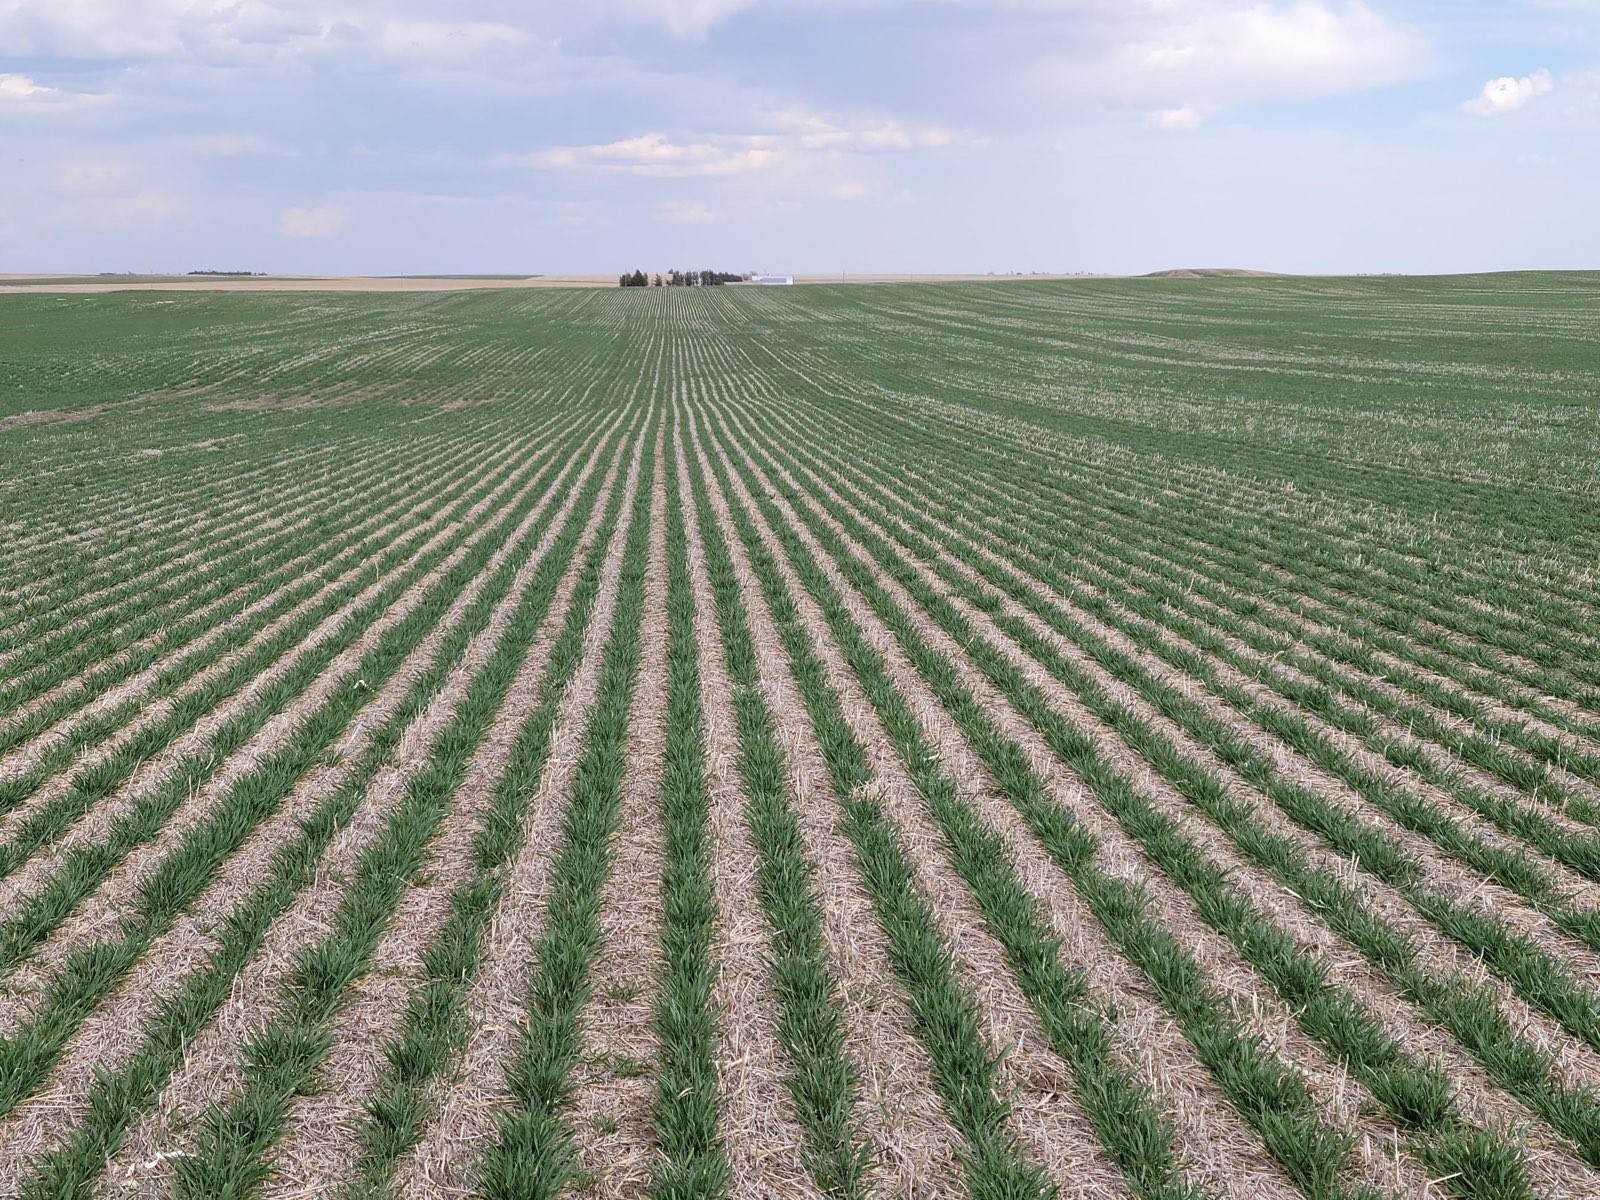 A no-till wheat field in Nebraska shows rows disappearing into a vanishing point in the background.